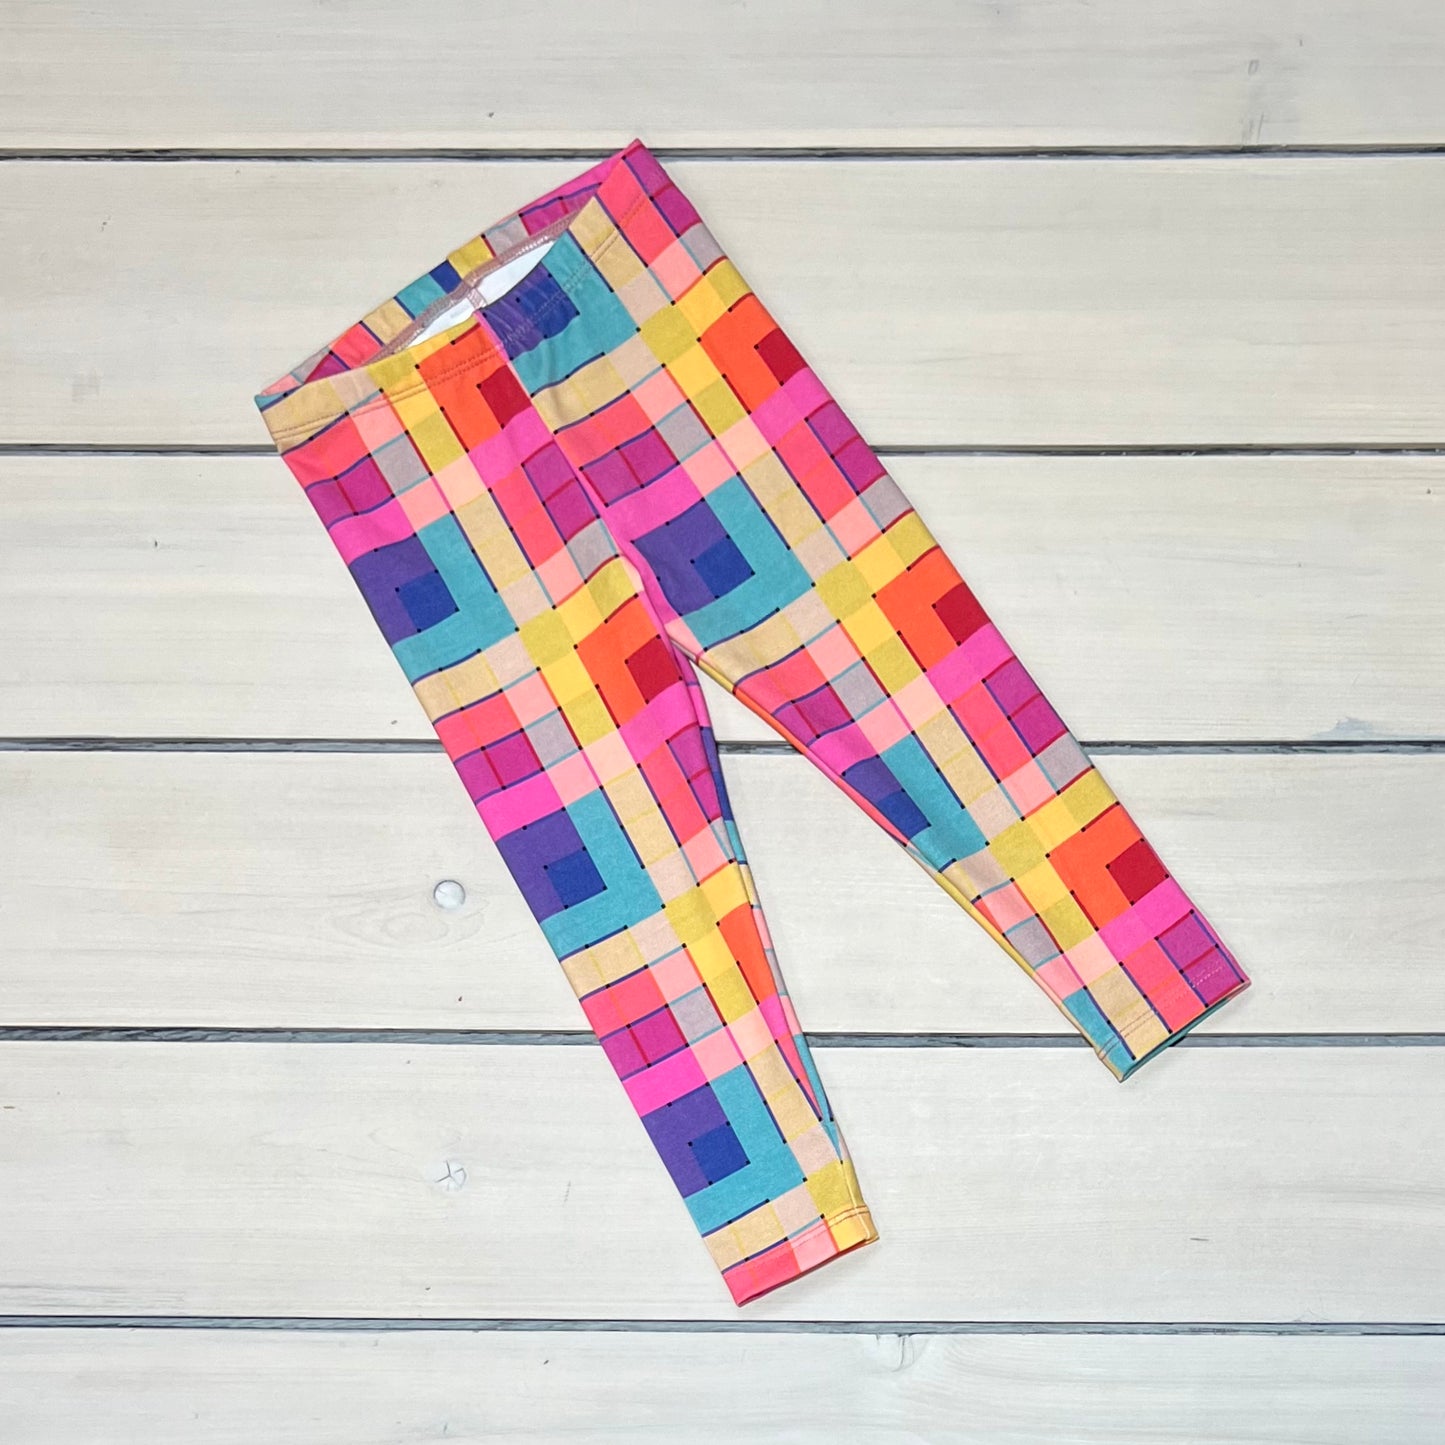 IMIXBOX Wholesale Candy Colored Elastic Ankle Length Neon Go Colors Leggings  Online Multi Color Options W3007 From Viviant, $7.03